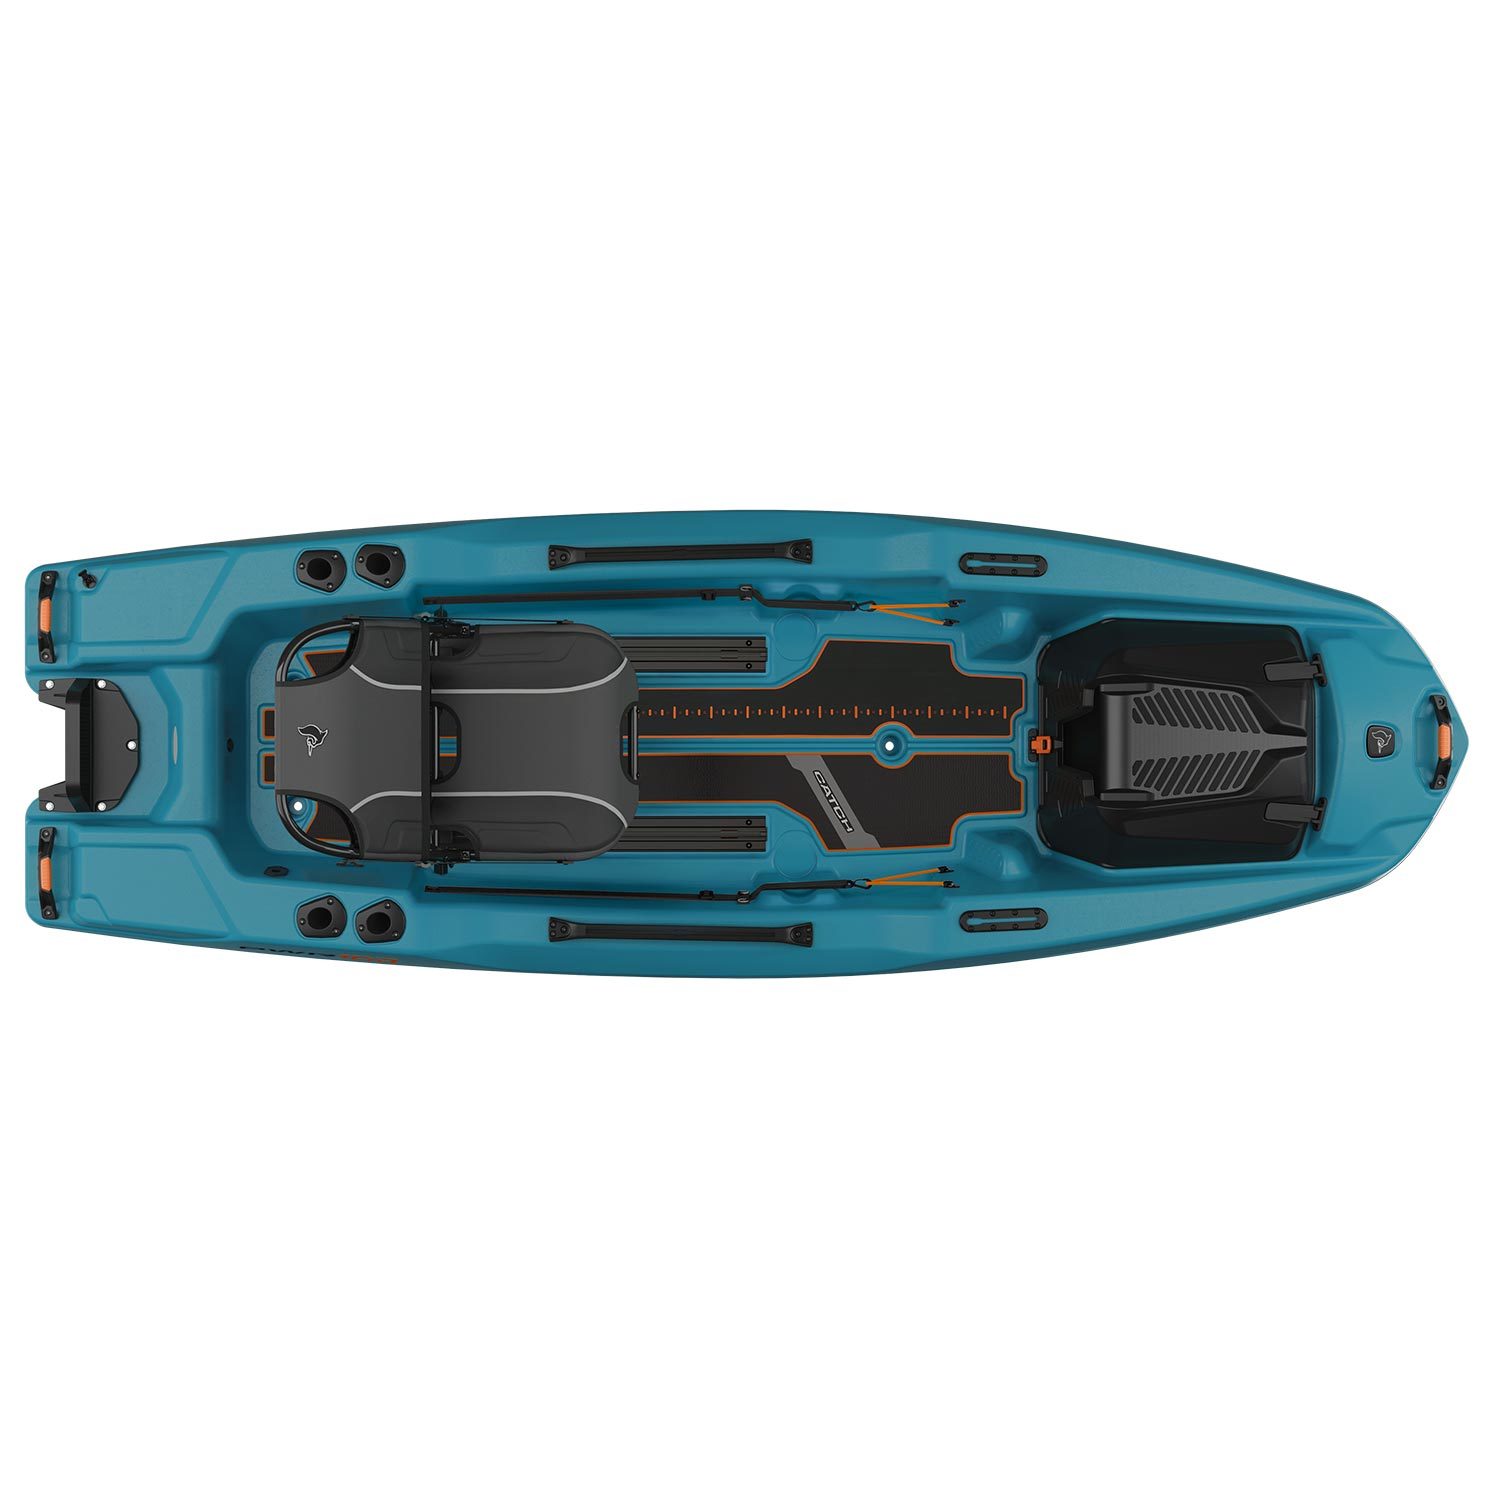 PELICAN 9'9 The Catch PWR100 Sit-On-Top Angler Kayak